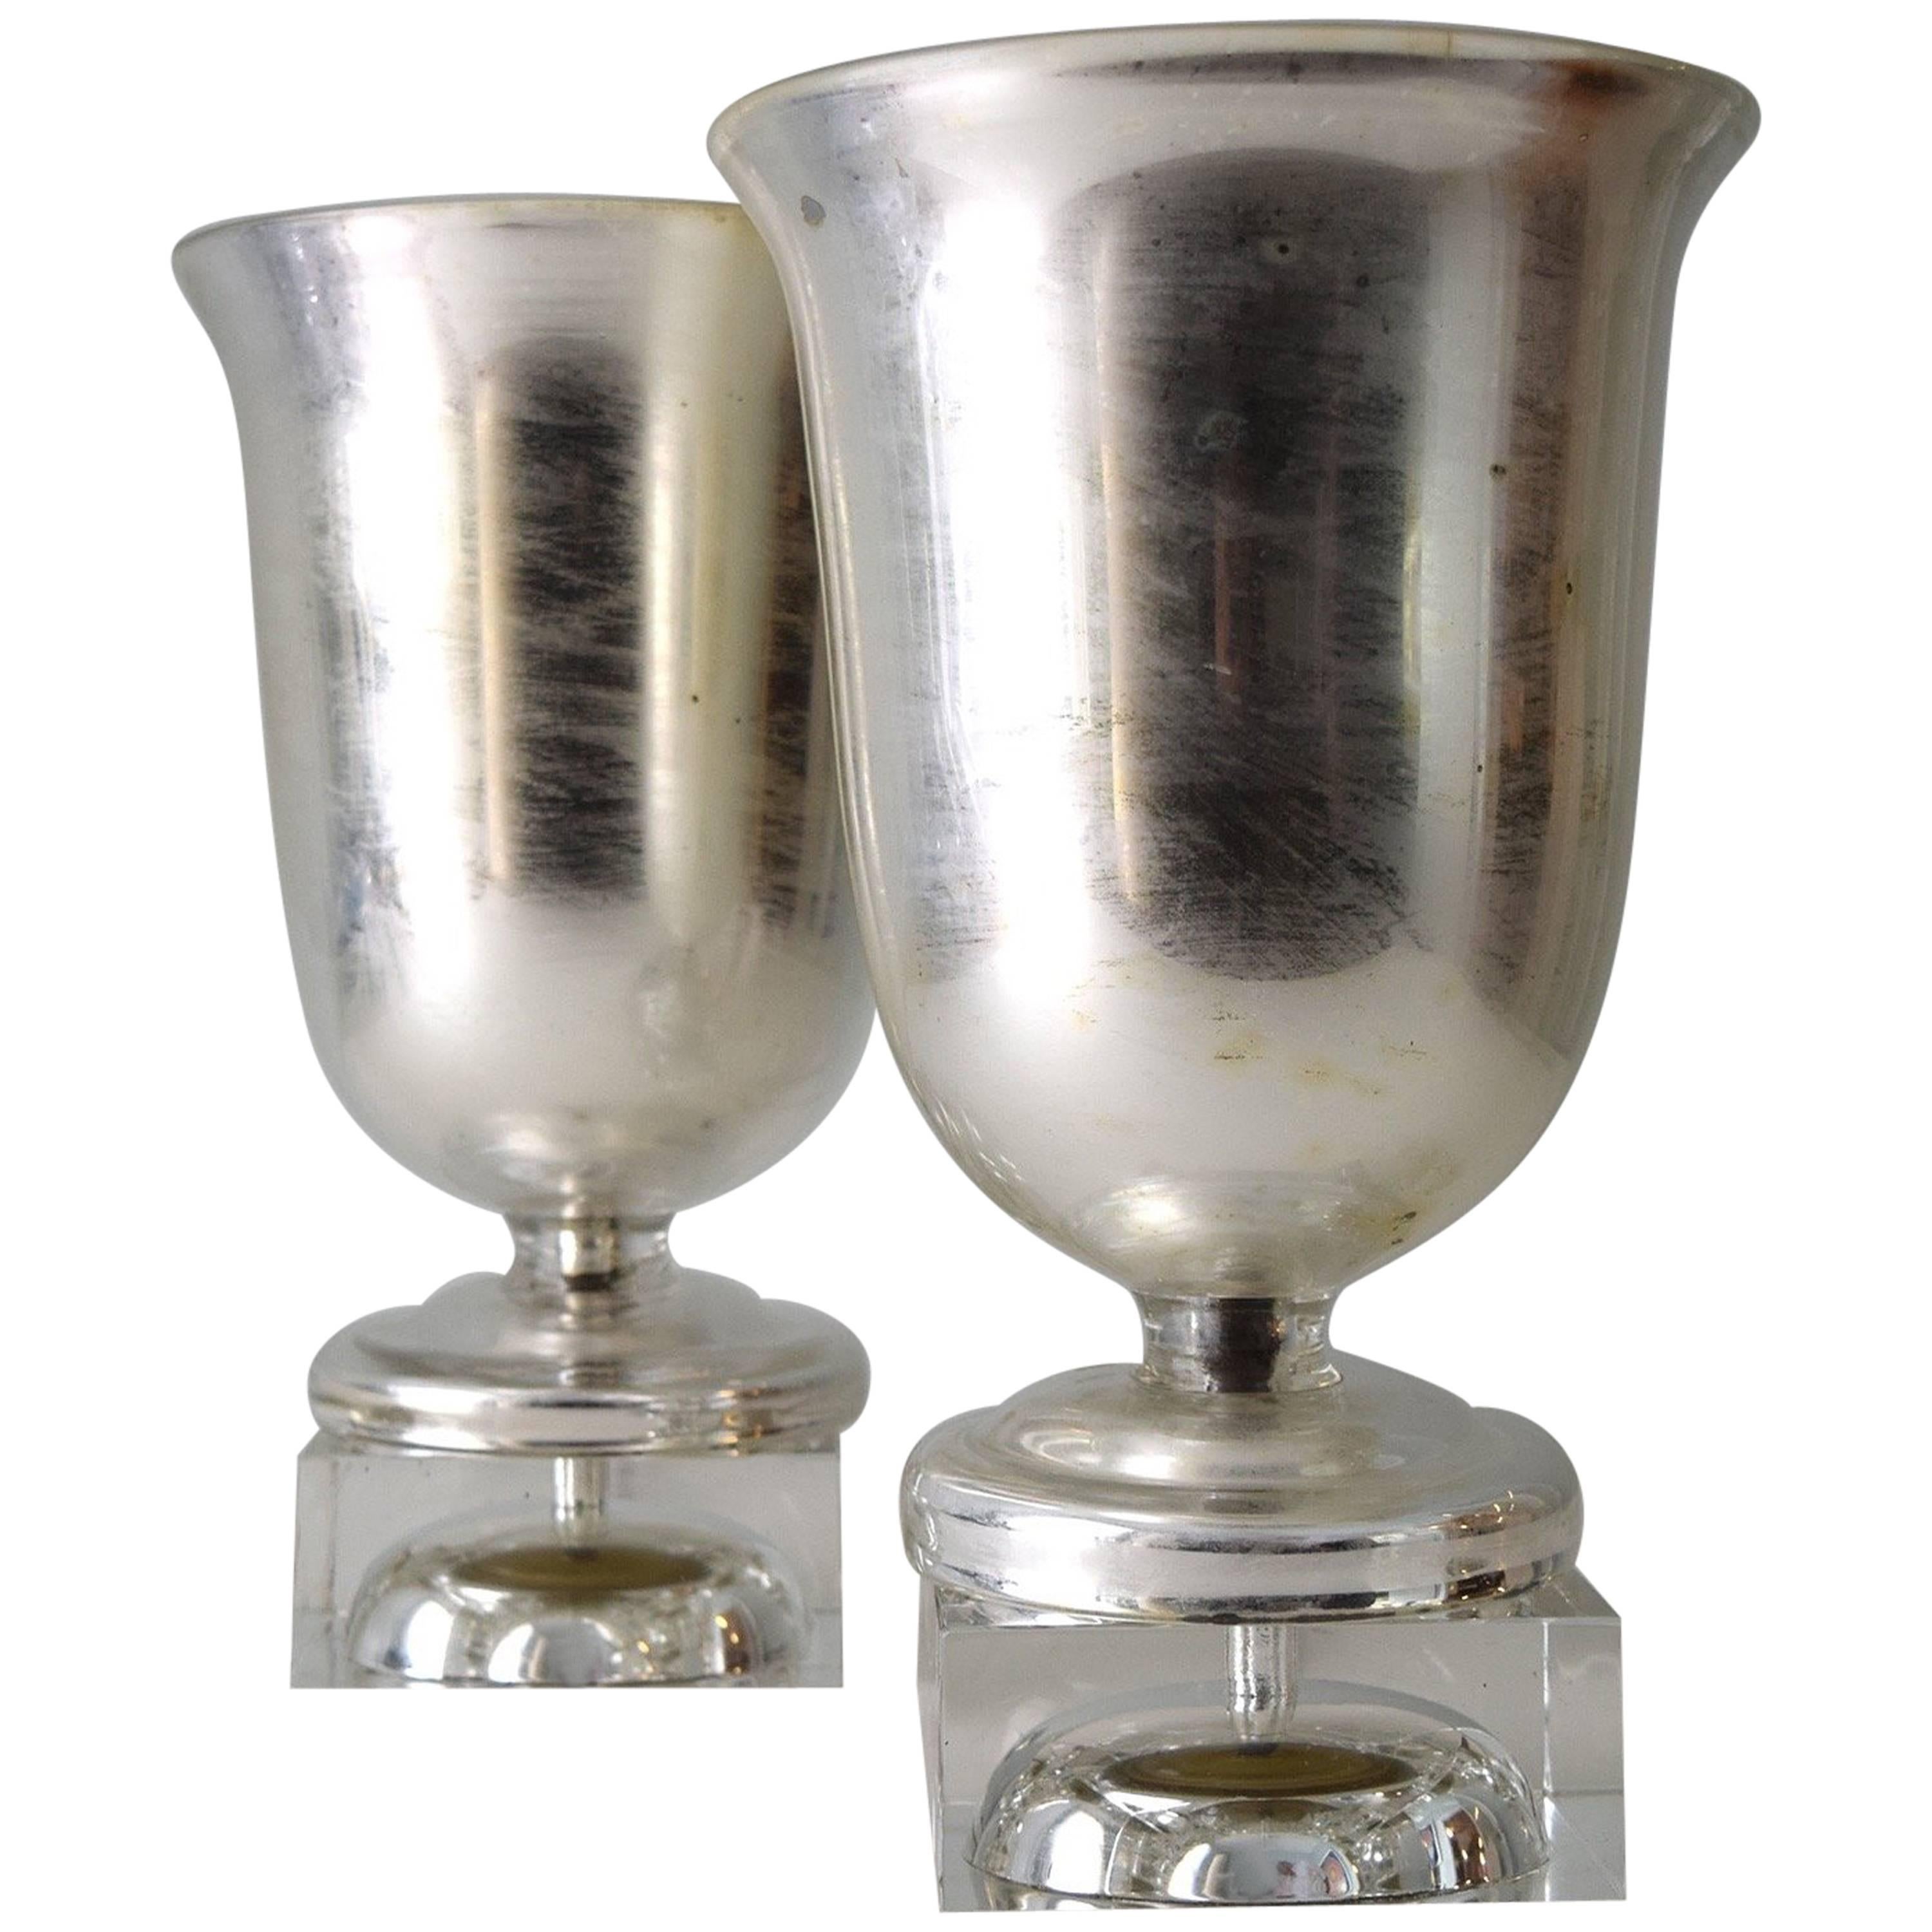 Pair of 1930s Silvered-Glass Urn Lamps by Steuben